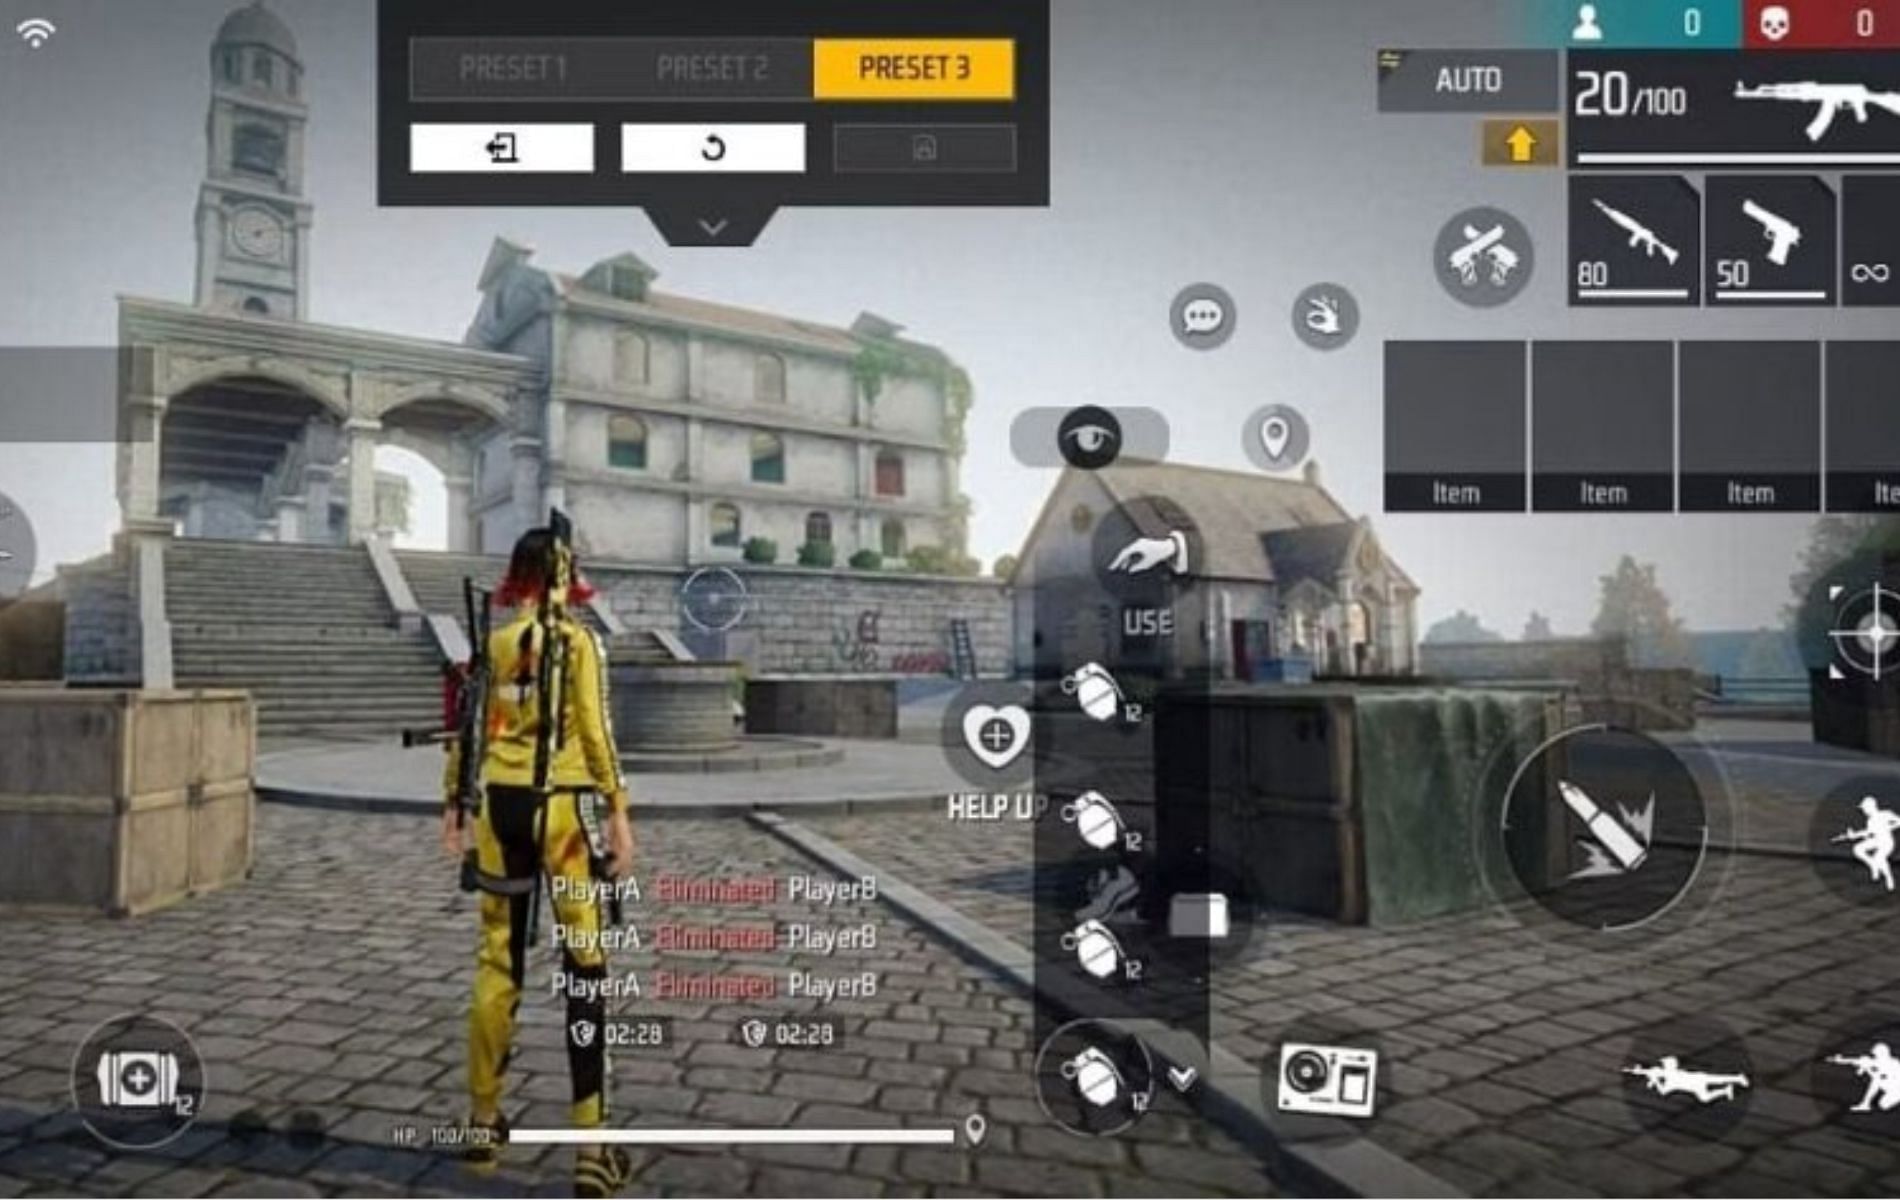 A well-adjusted HUD Layout can make all the difference (Image via Garena)